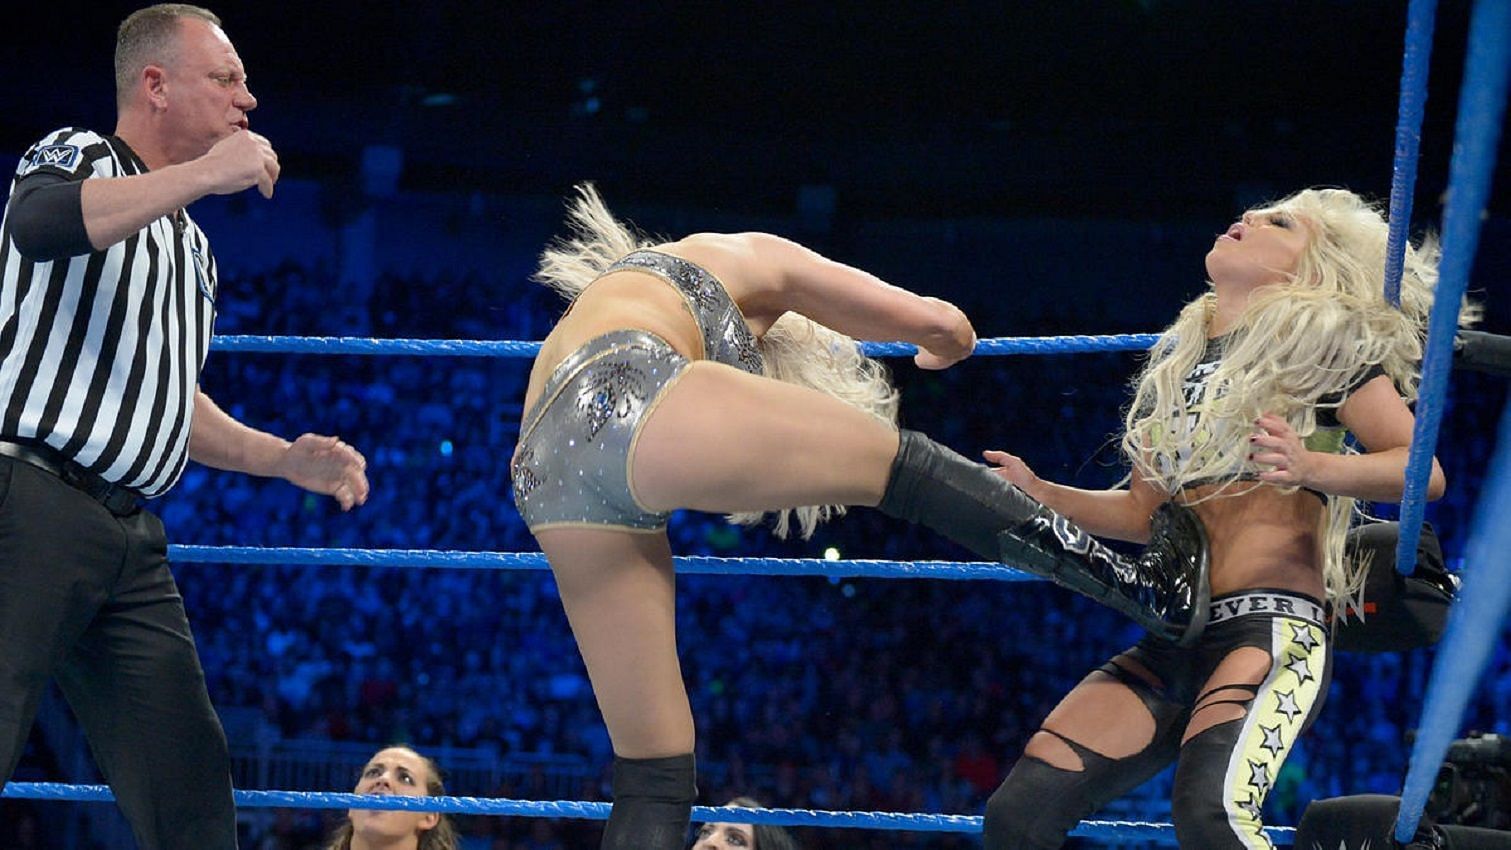 Charlotte faced Liv Morgan several times on RAW &amp; SD